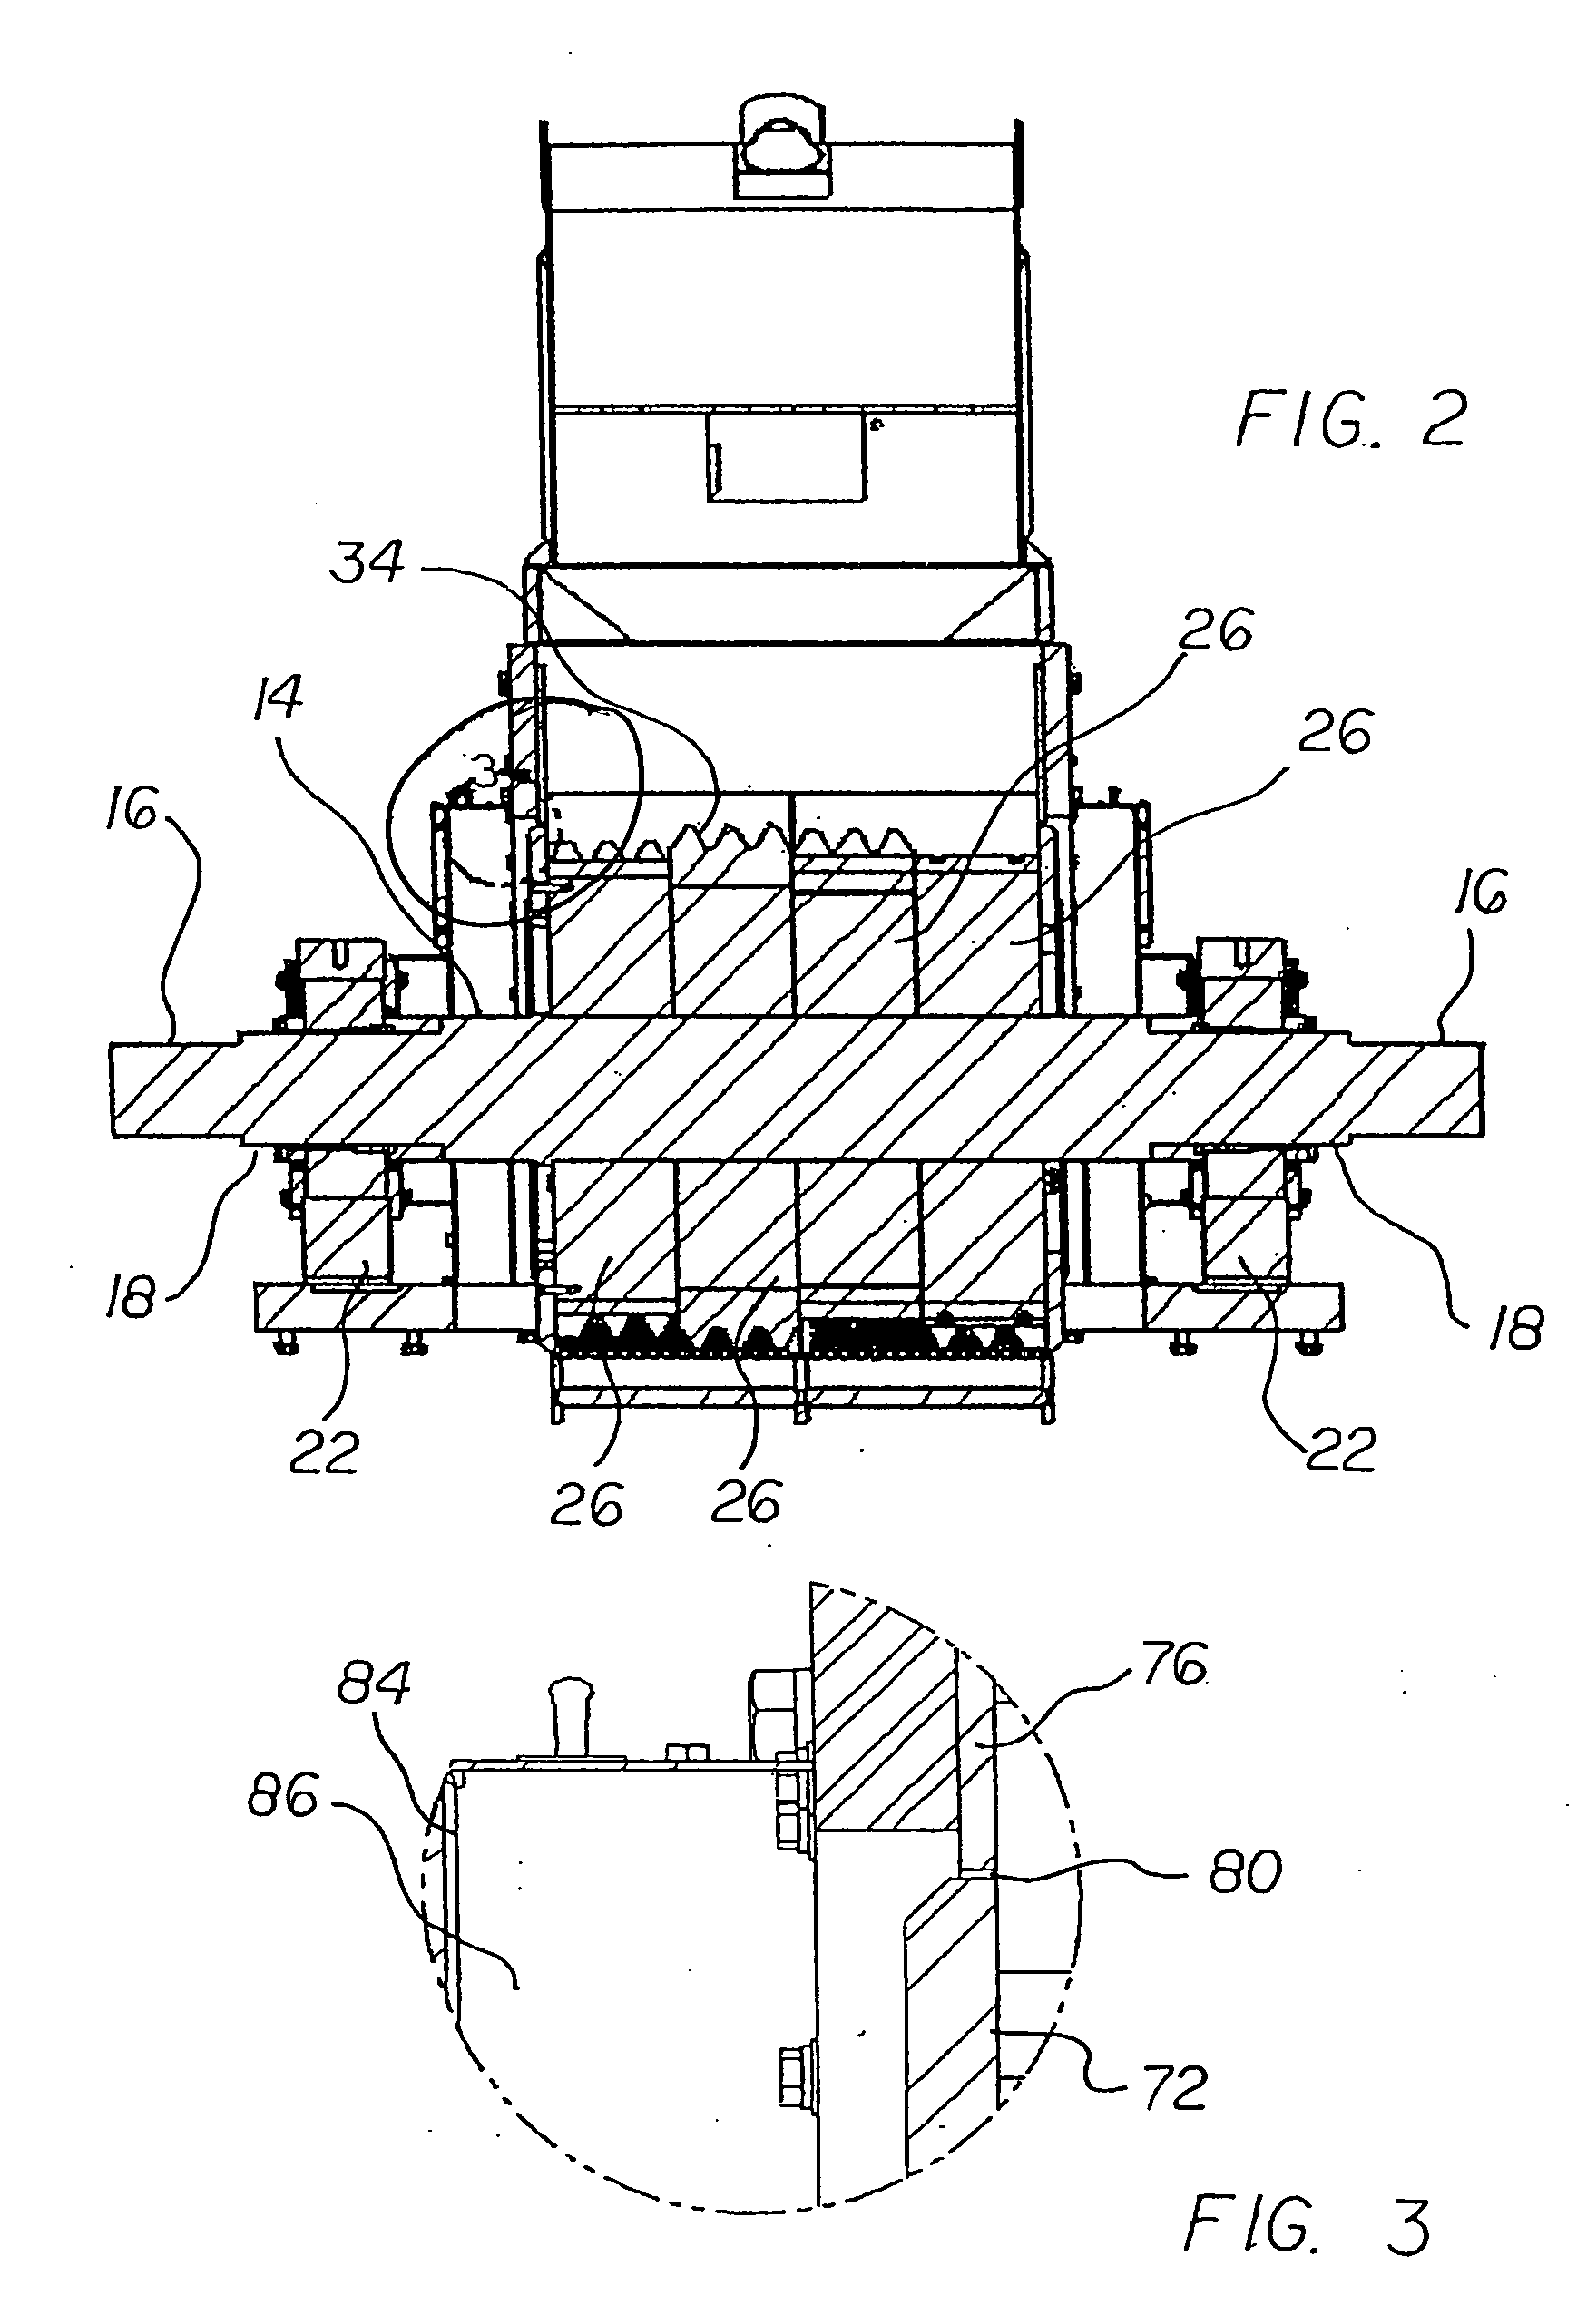 Tire size reduction/wire separation system